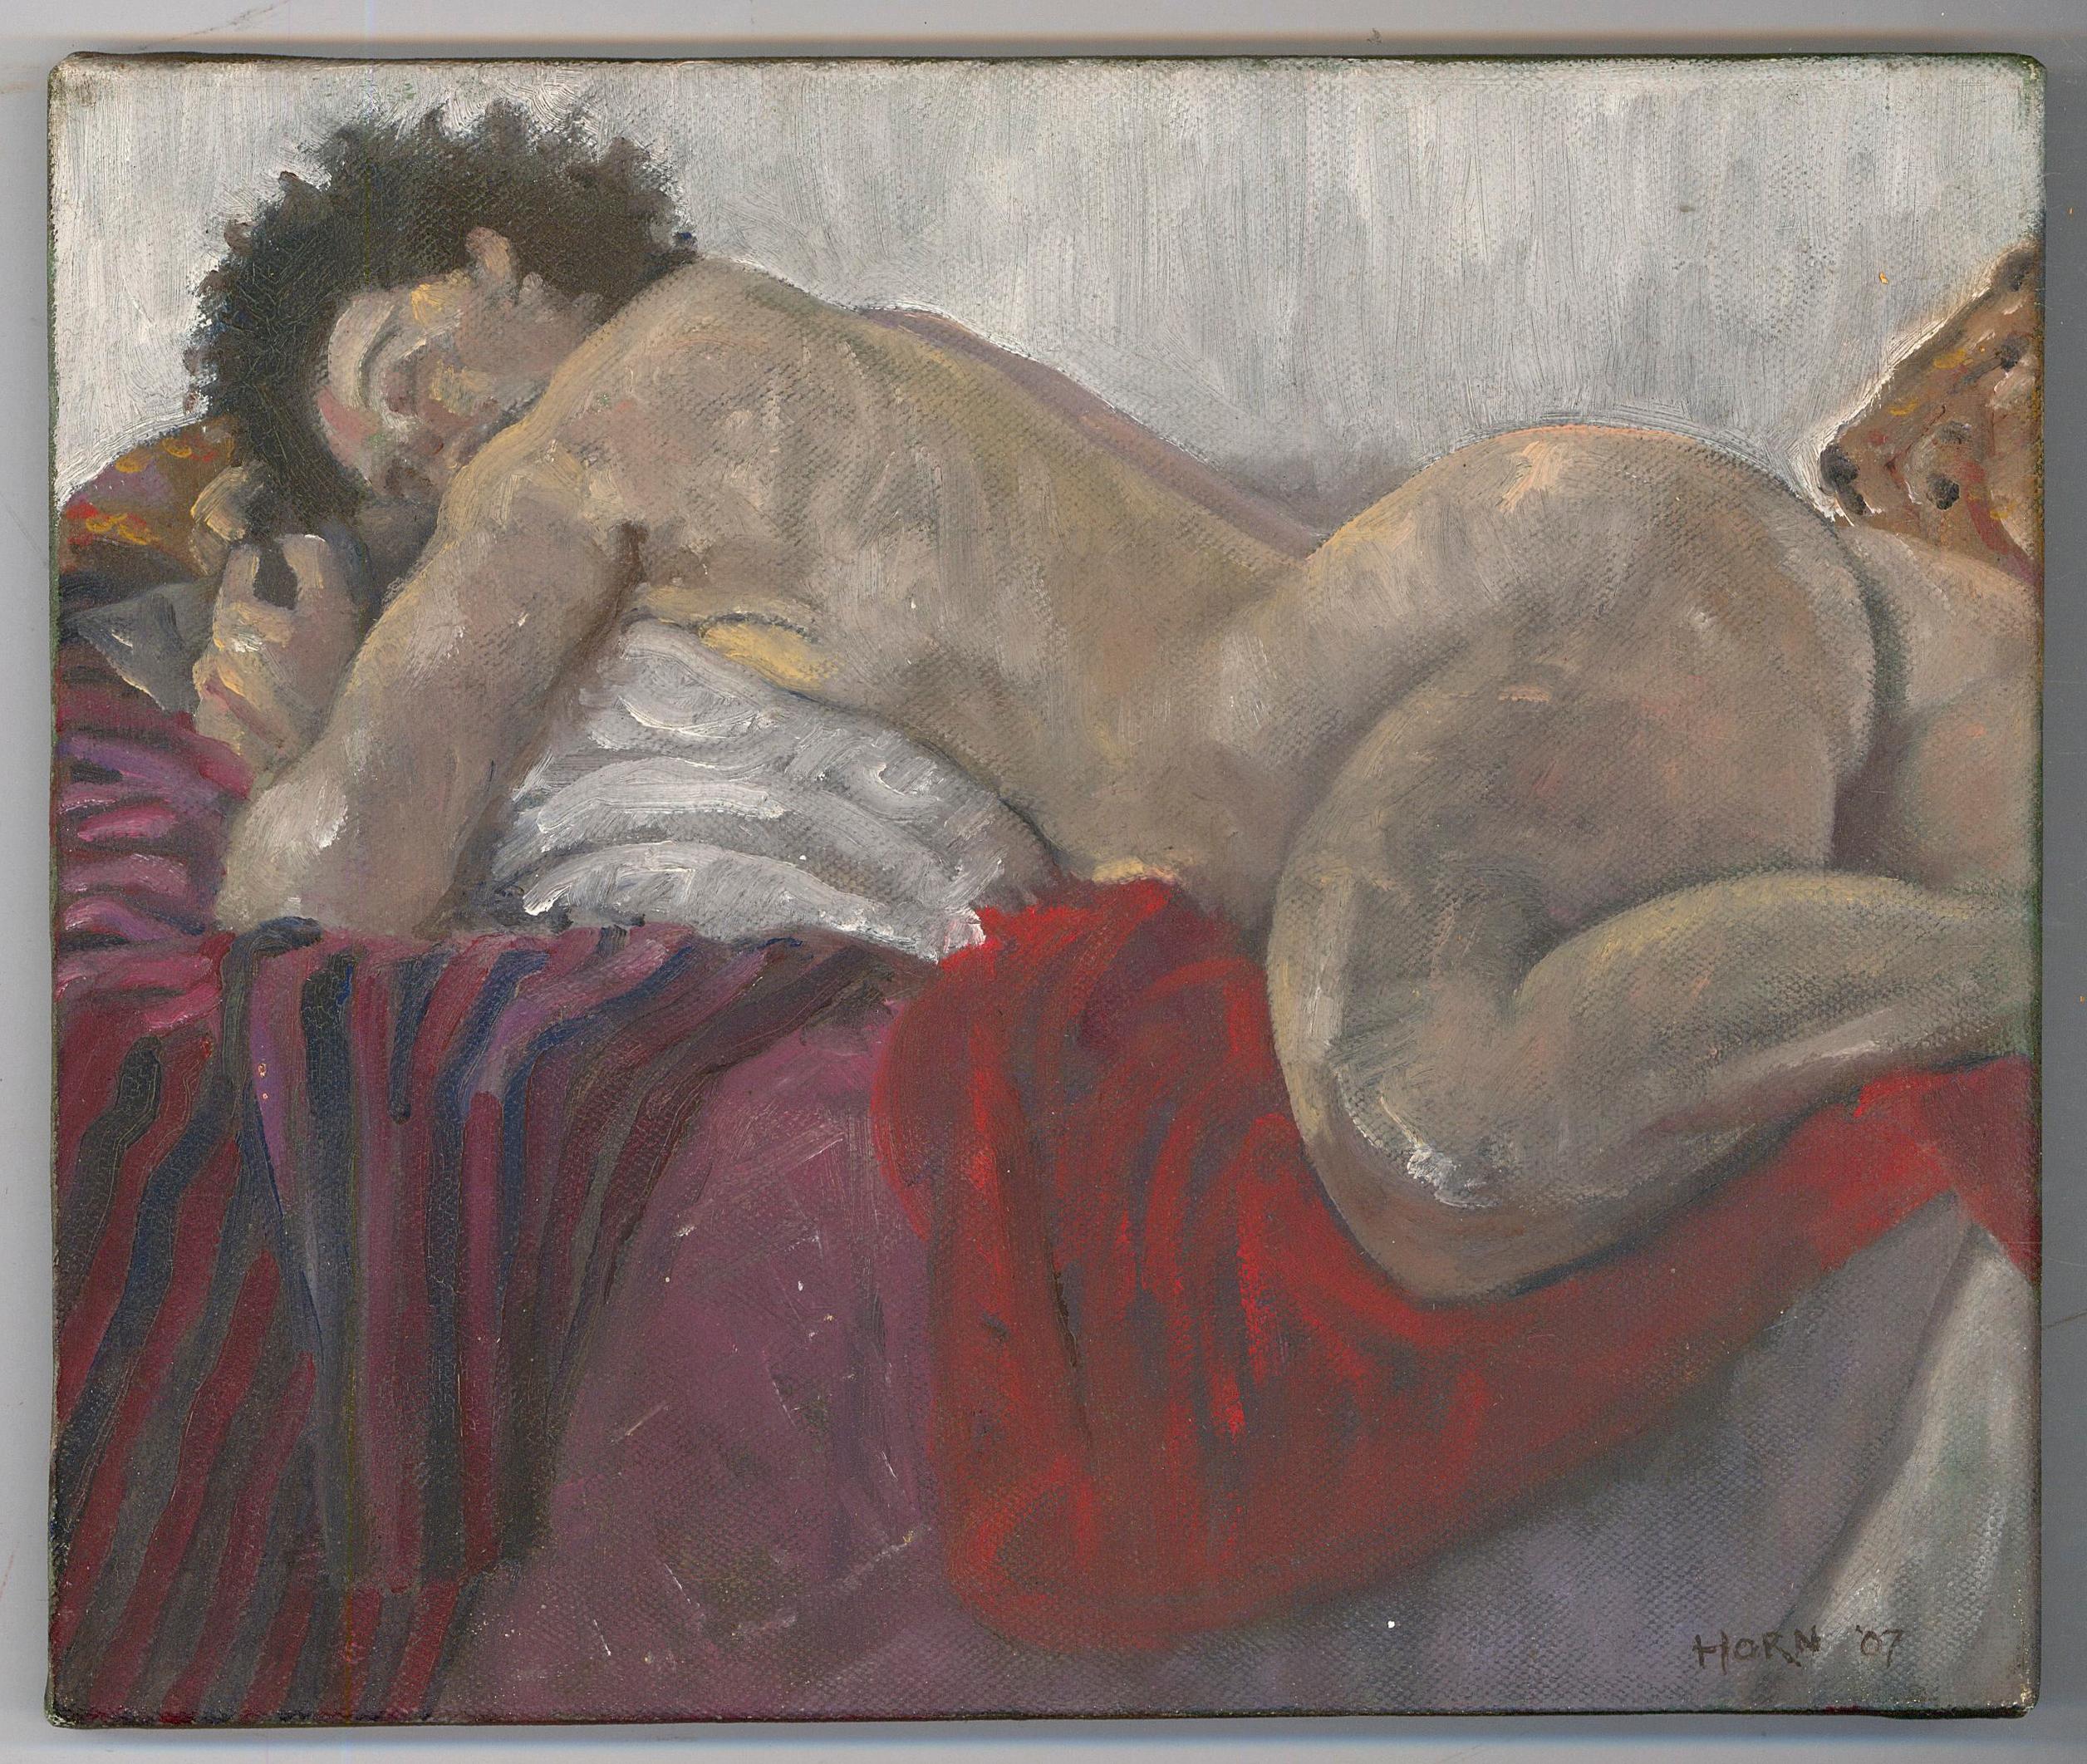 Horn - 2007 Acrylic, Reclining Nude - Painting by Unknown